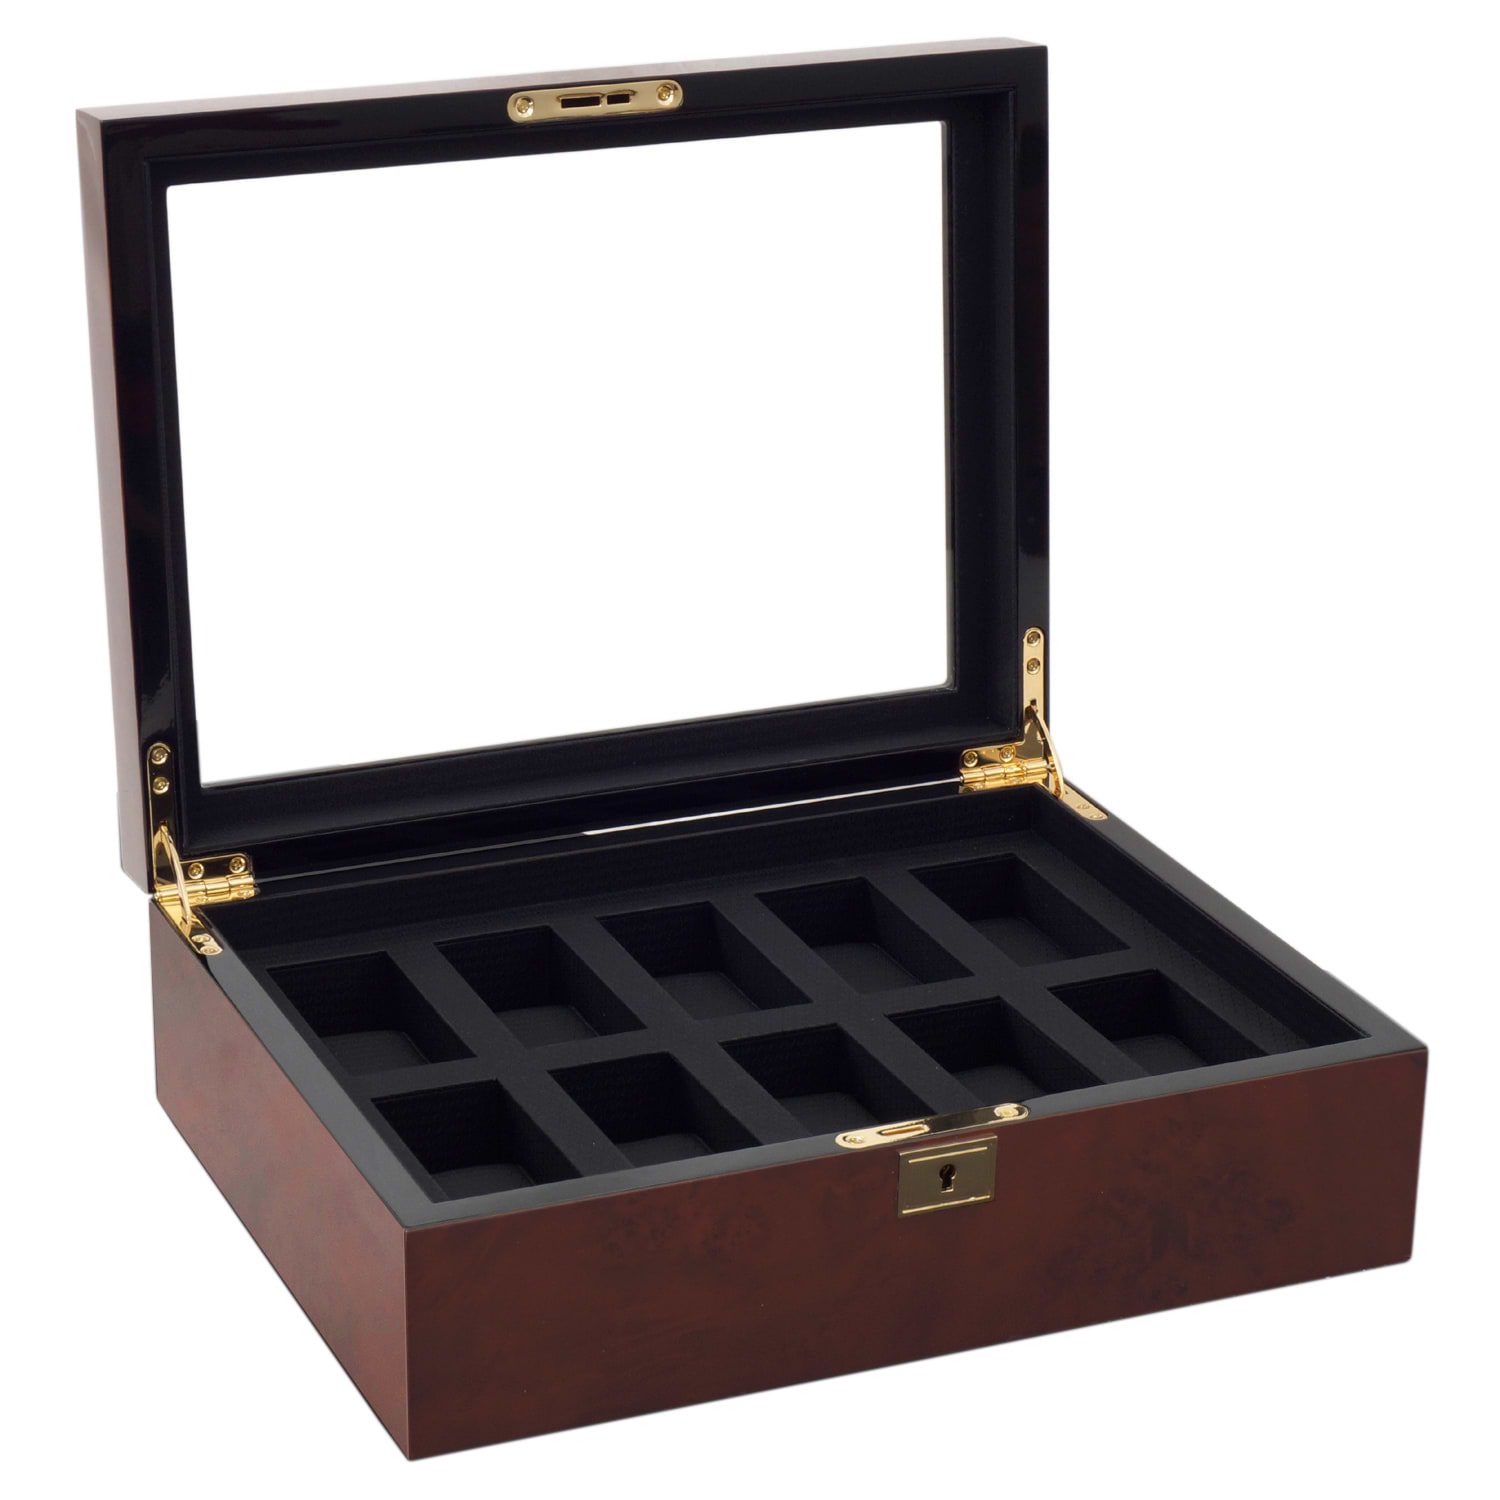 WOLF Savoy Men's Glass Top, 10 Compartment Wooden Watch Box w/ Key Lock 2 Colors